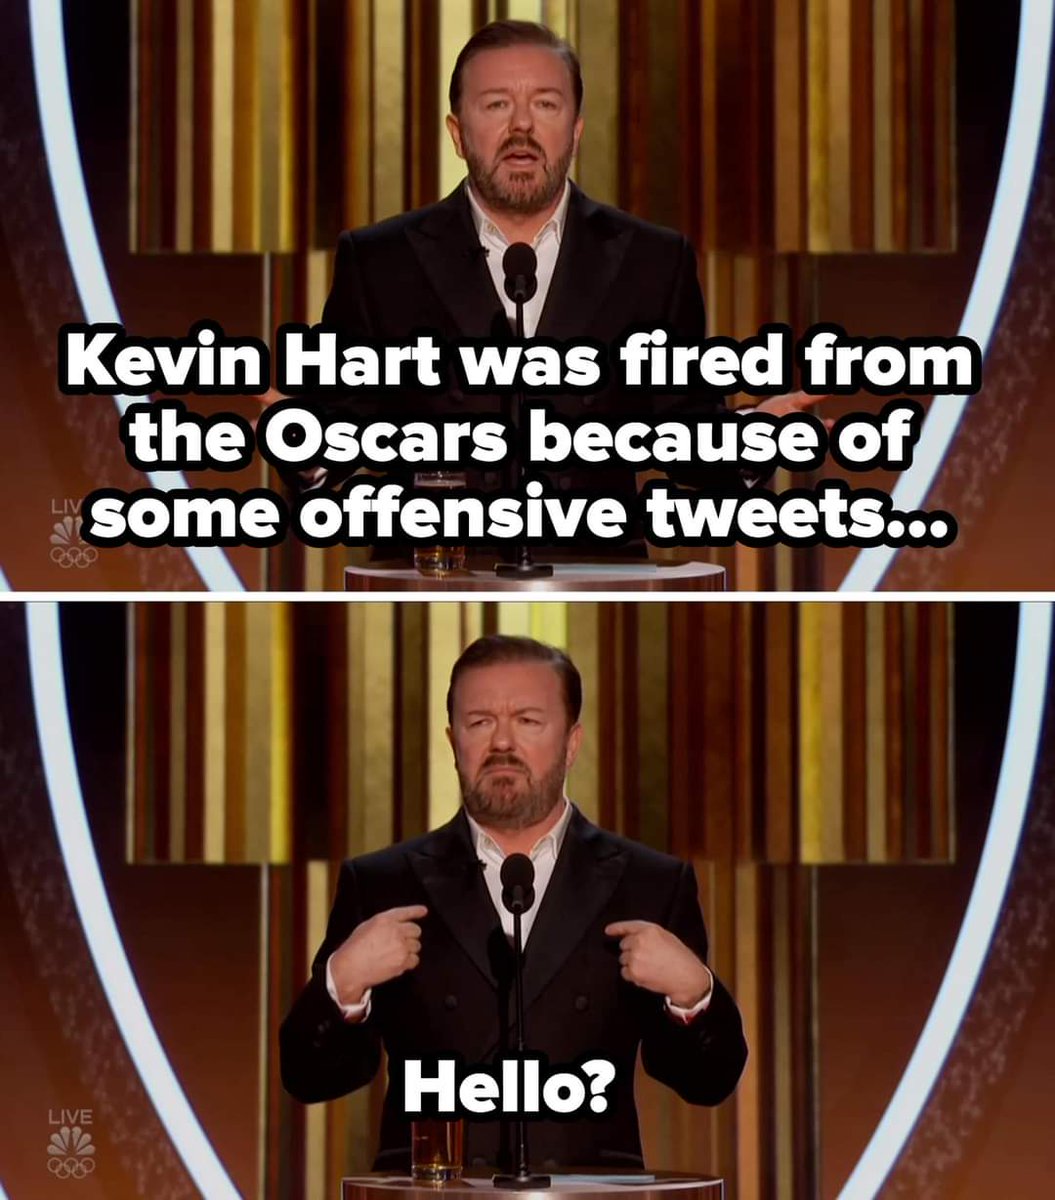 Some 'Offensive' tweets 😂

#GoldenGlobes #GoldenGlobes2020
@rickygervais 🔥